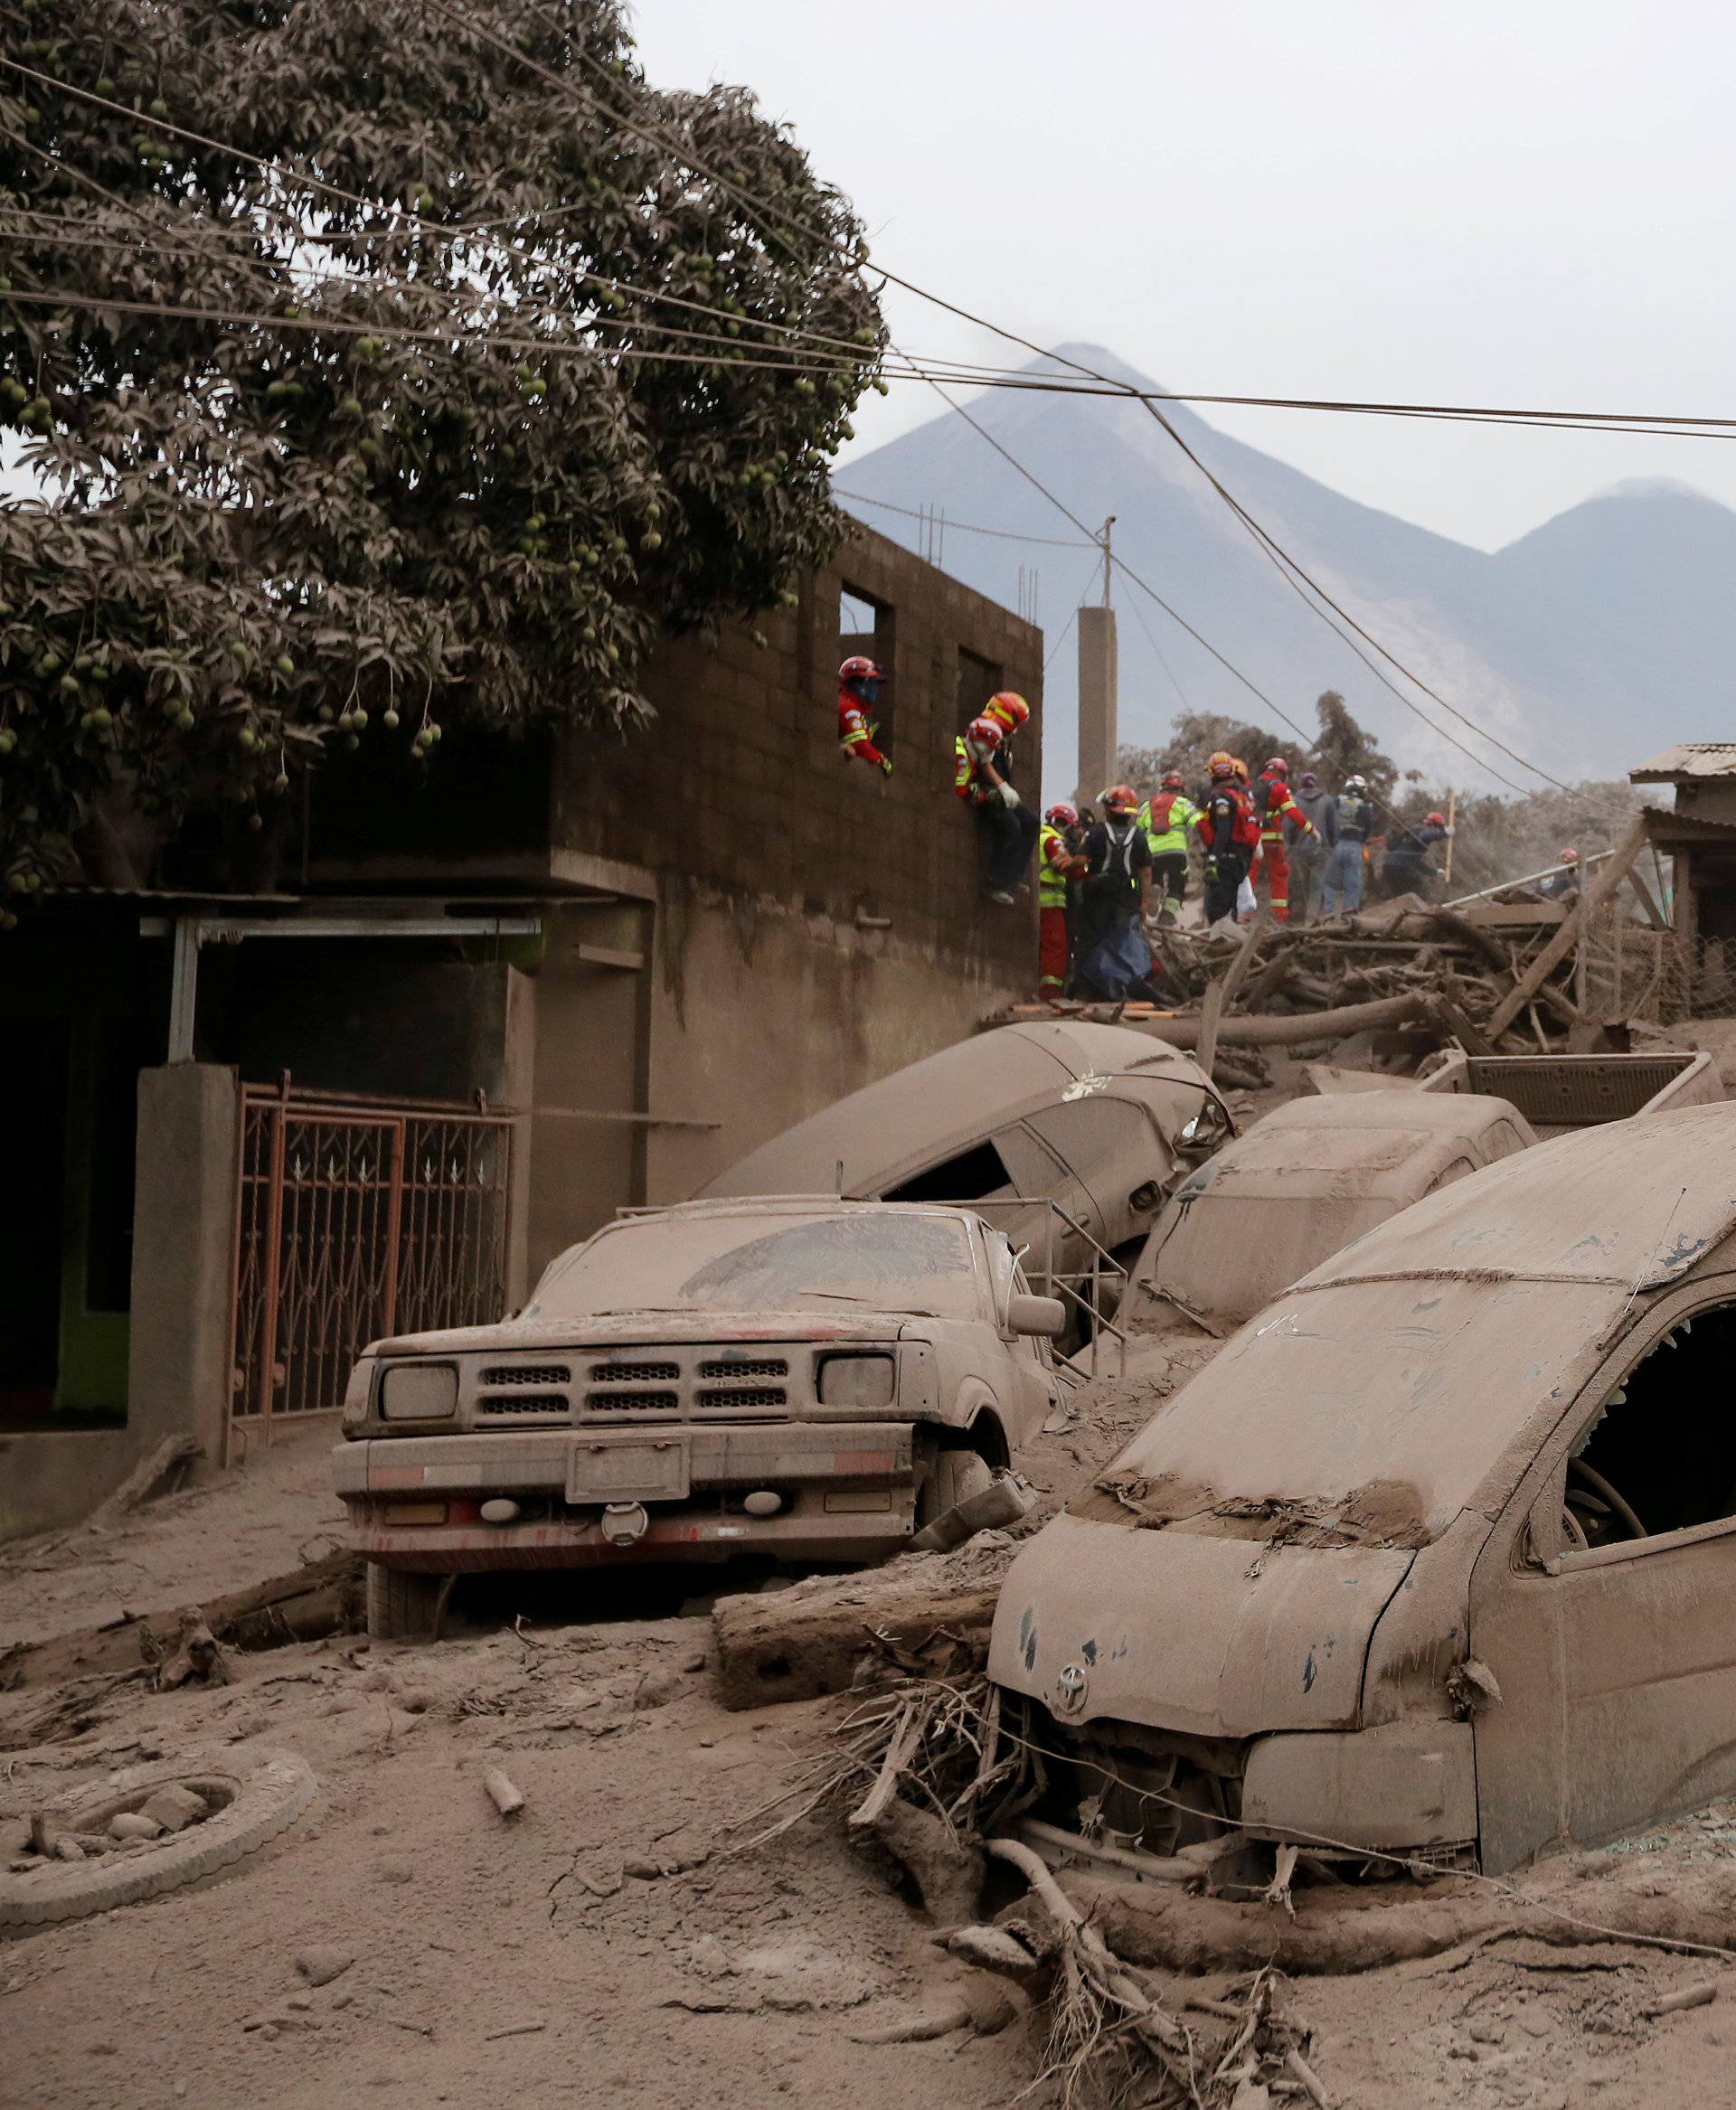 Firefighters and rescue workers look for bodies and survivors at an area affected by the eruption of the Fuego volcano in the community of San Miguel Los Lotes in Escuintla